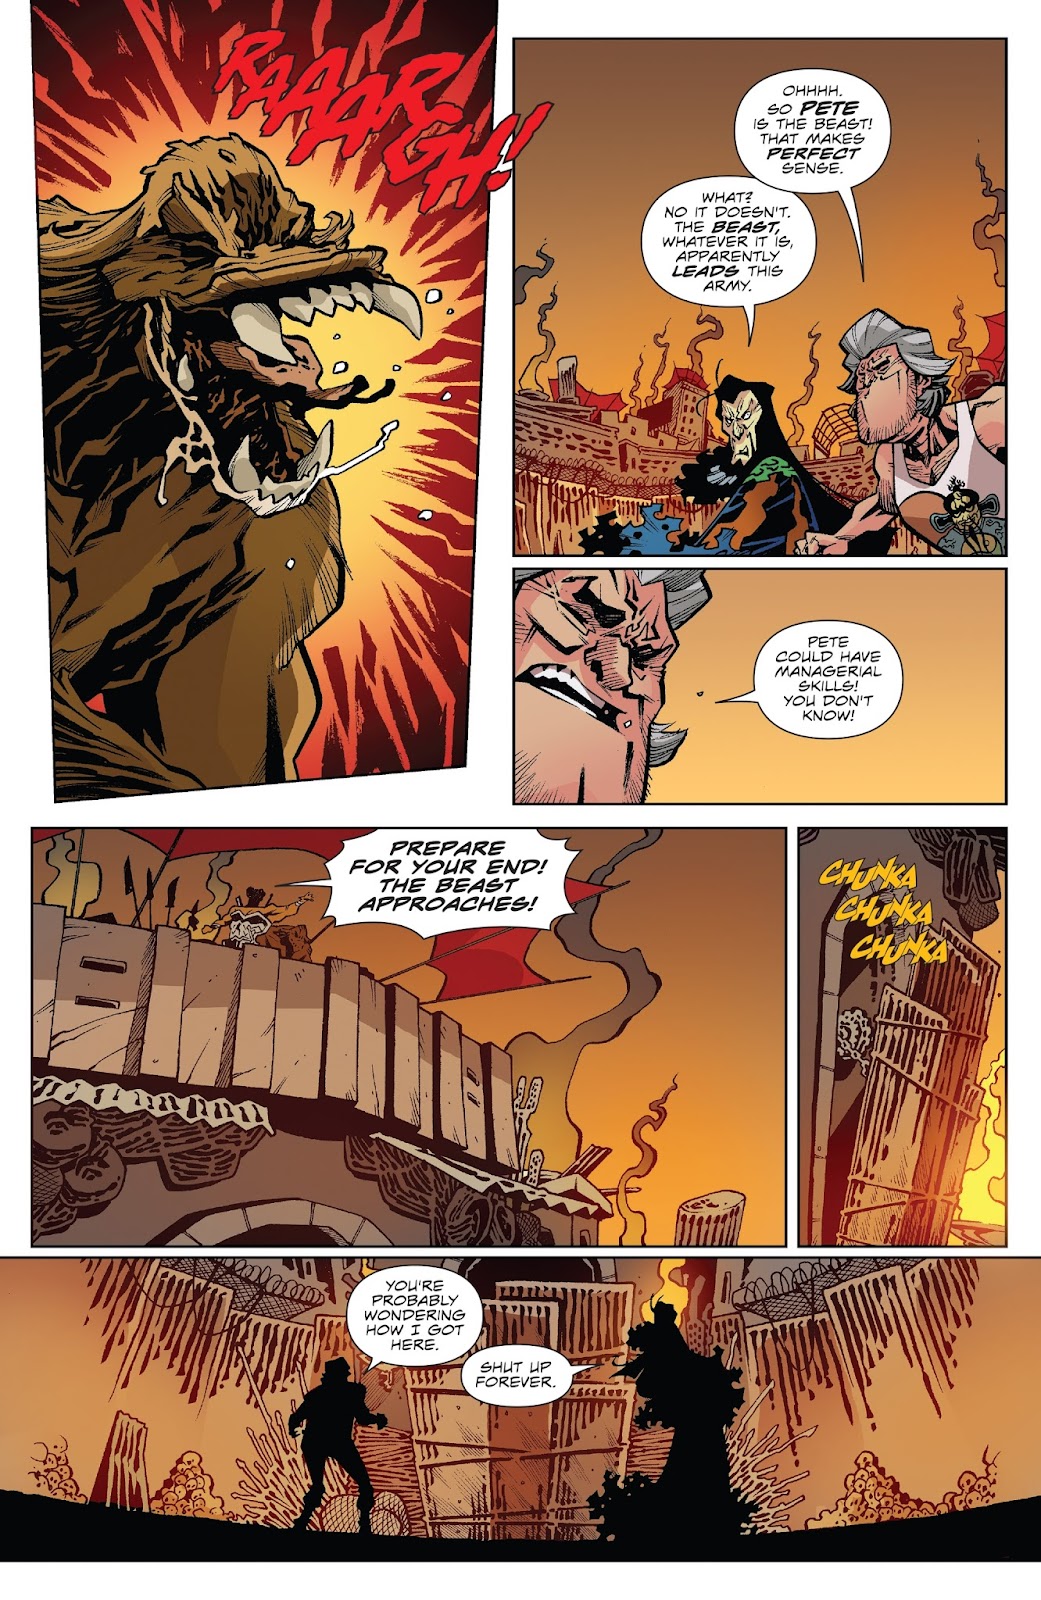 Big Trouble in Little China: Old Man Jack issue 4 - Page 8